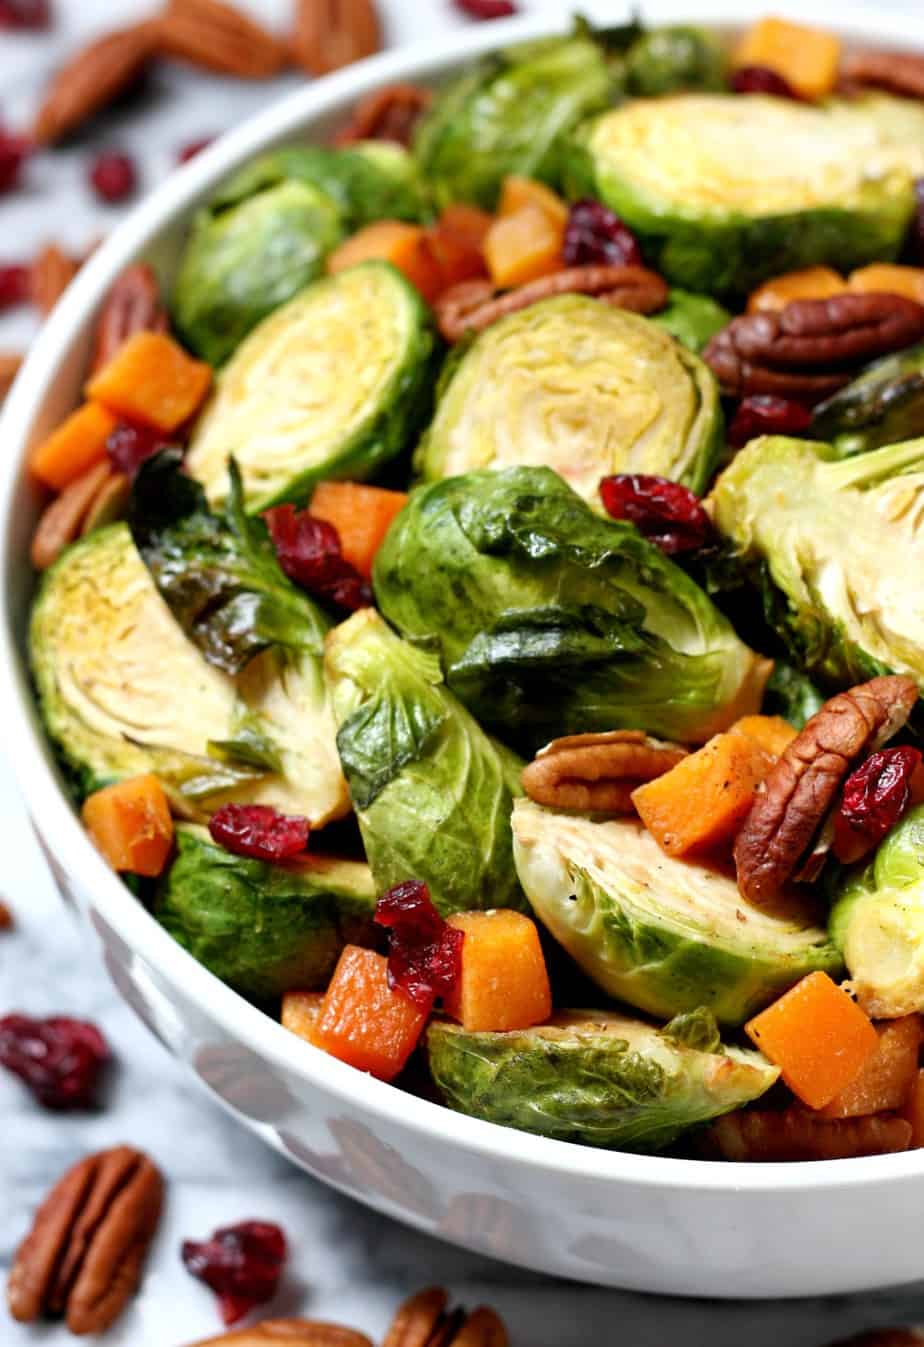 https://www.happygoluckyblog.com/wp-content/uploads/2017/11/Maple-Roasted-Brussels-Sprouts-and-Butternut-Squash-2.jpg